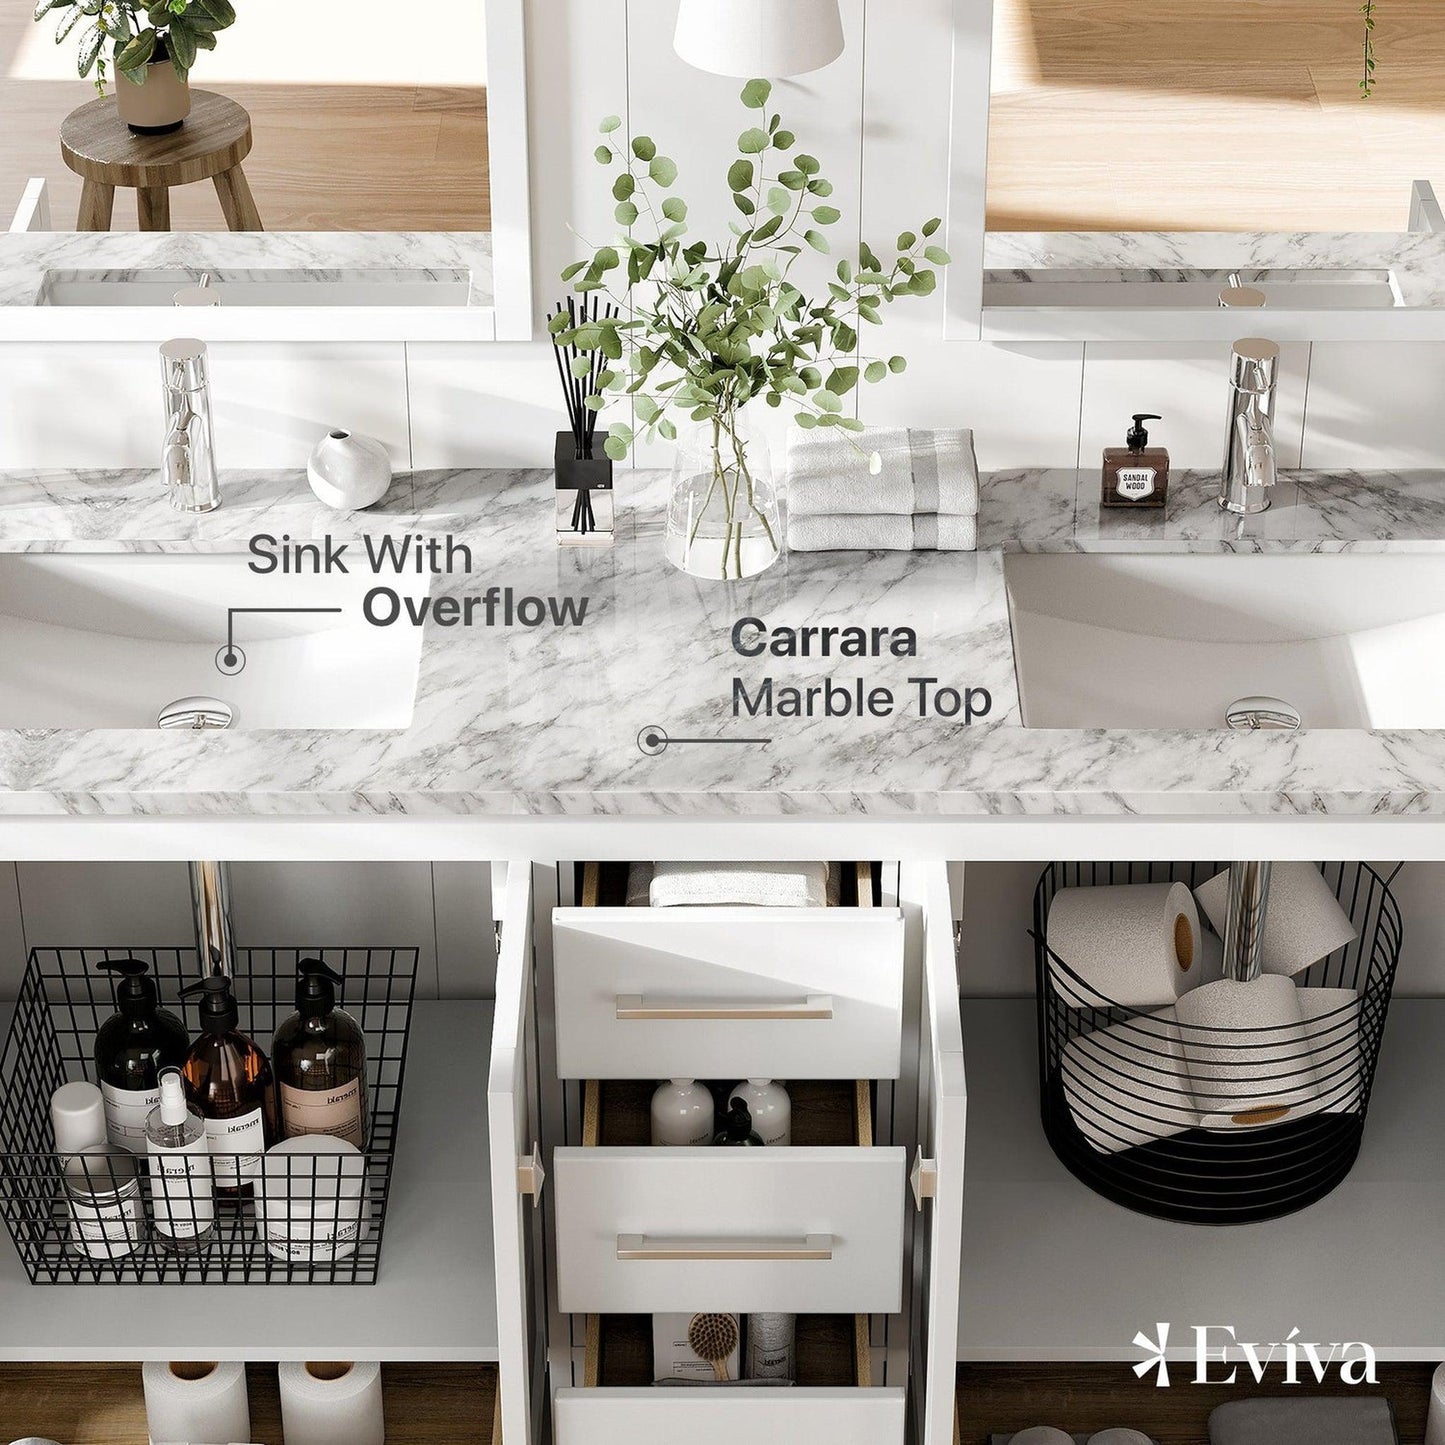 Eviva London 60" x 34" White Freestanding Bathroom Vanity With Carrara Marble Countertop and Double Undermount Sink